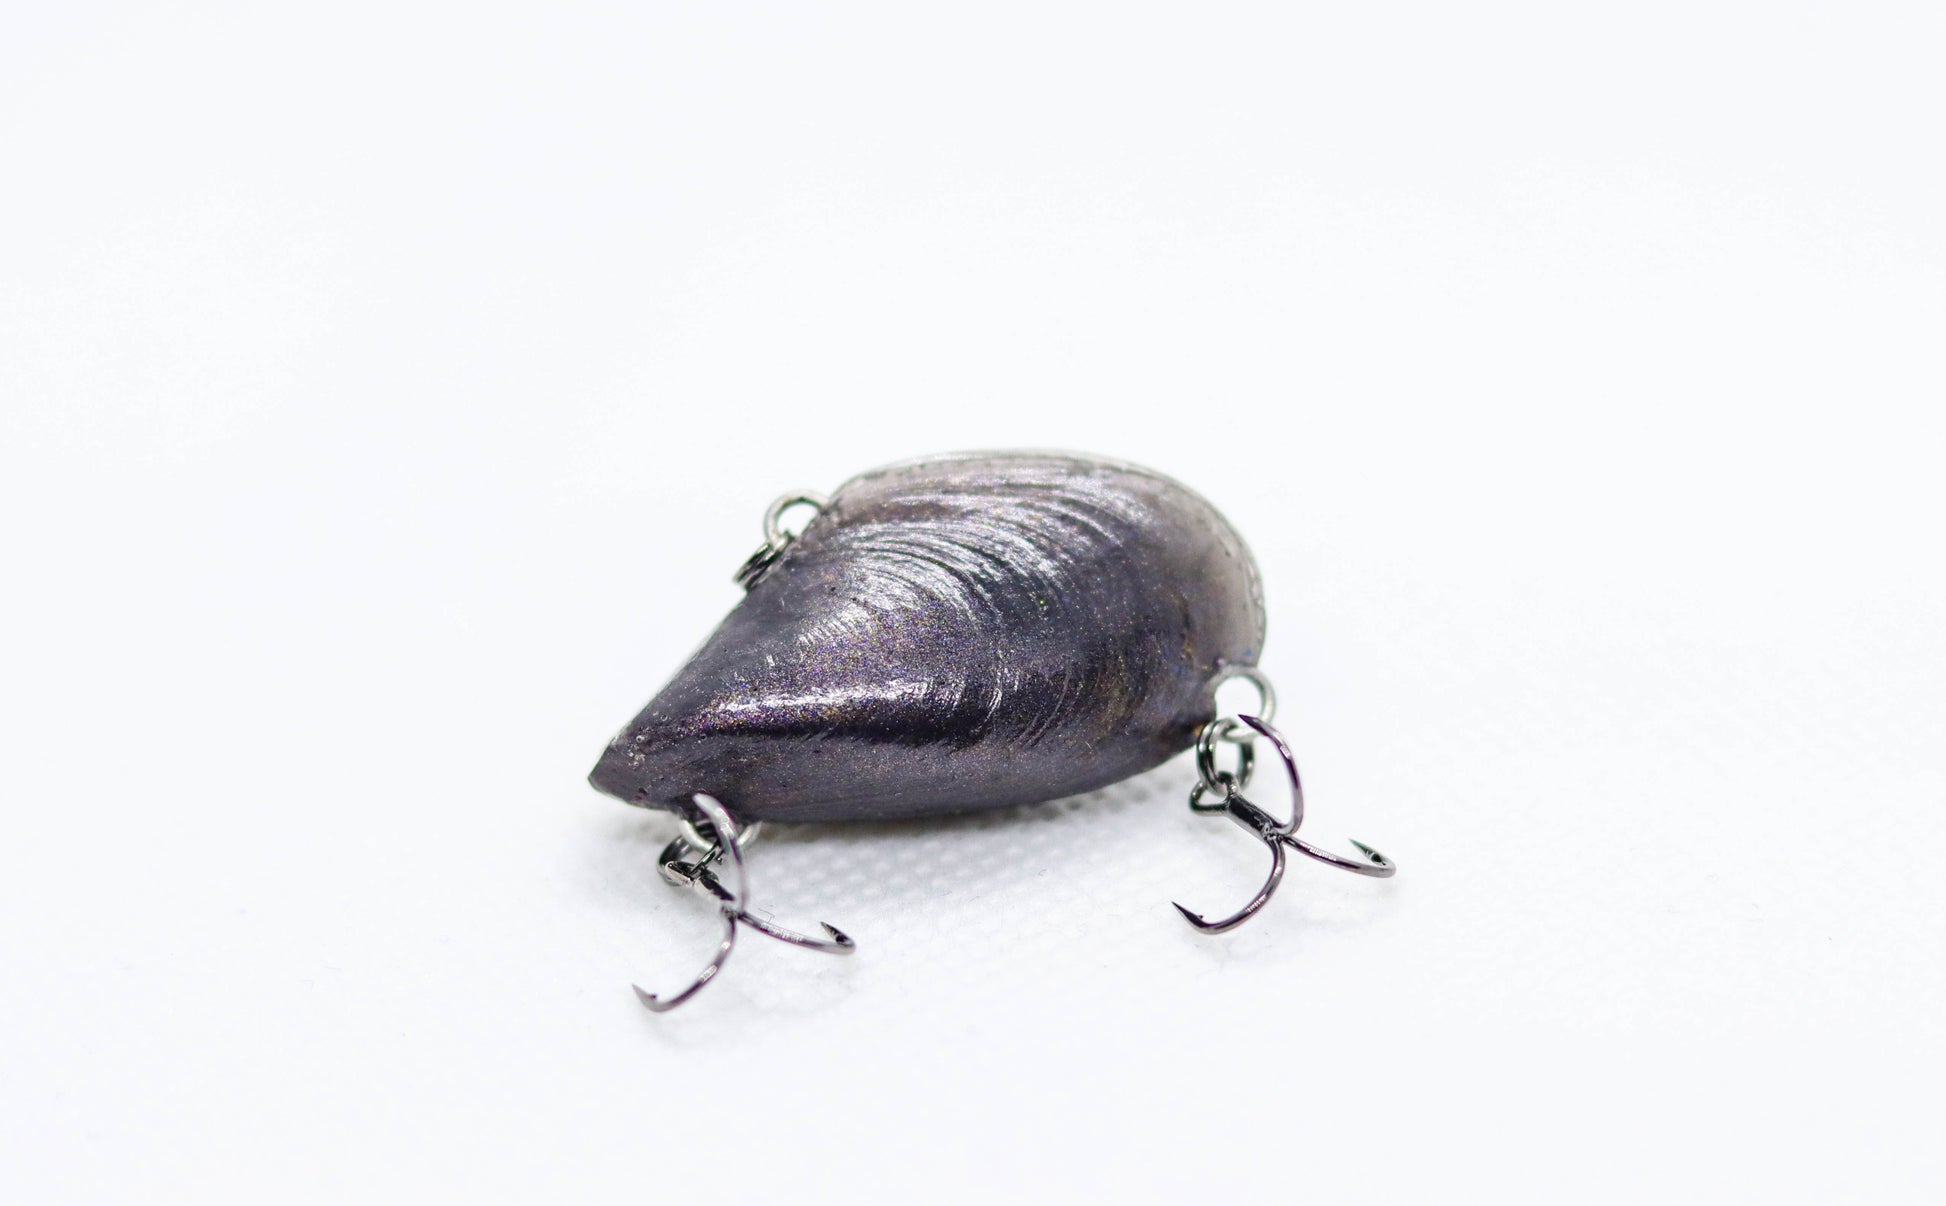 41mm 'Upgrader' Mussel Vibe – outback-breamer-baits